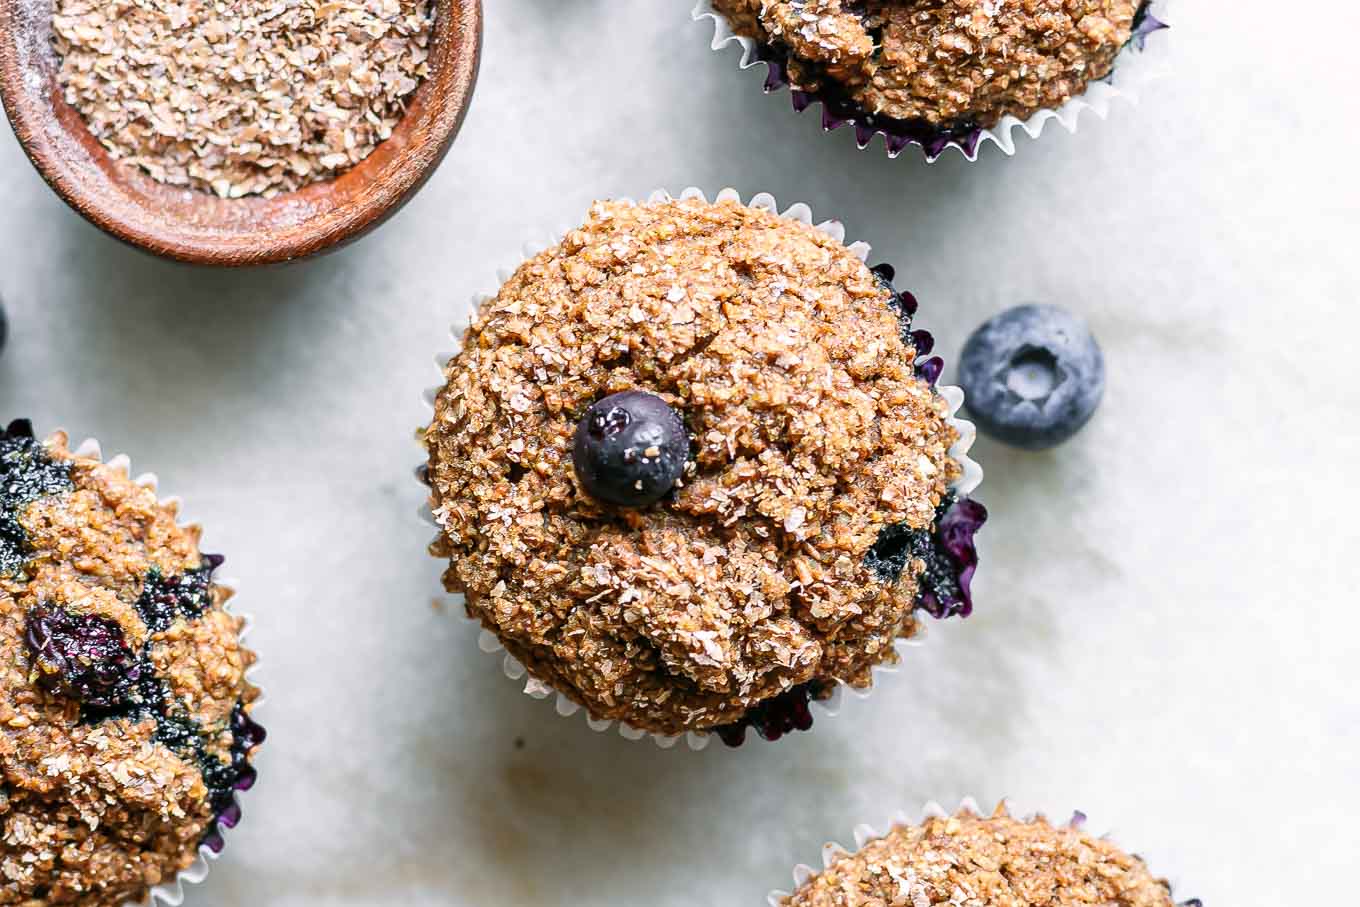 plant-based blueberry bran muffins on a white table with fresh blueberries and a bowl of wheat bran